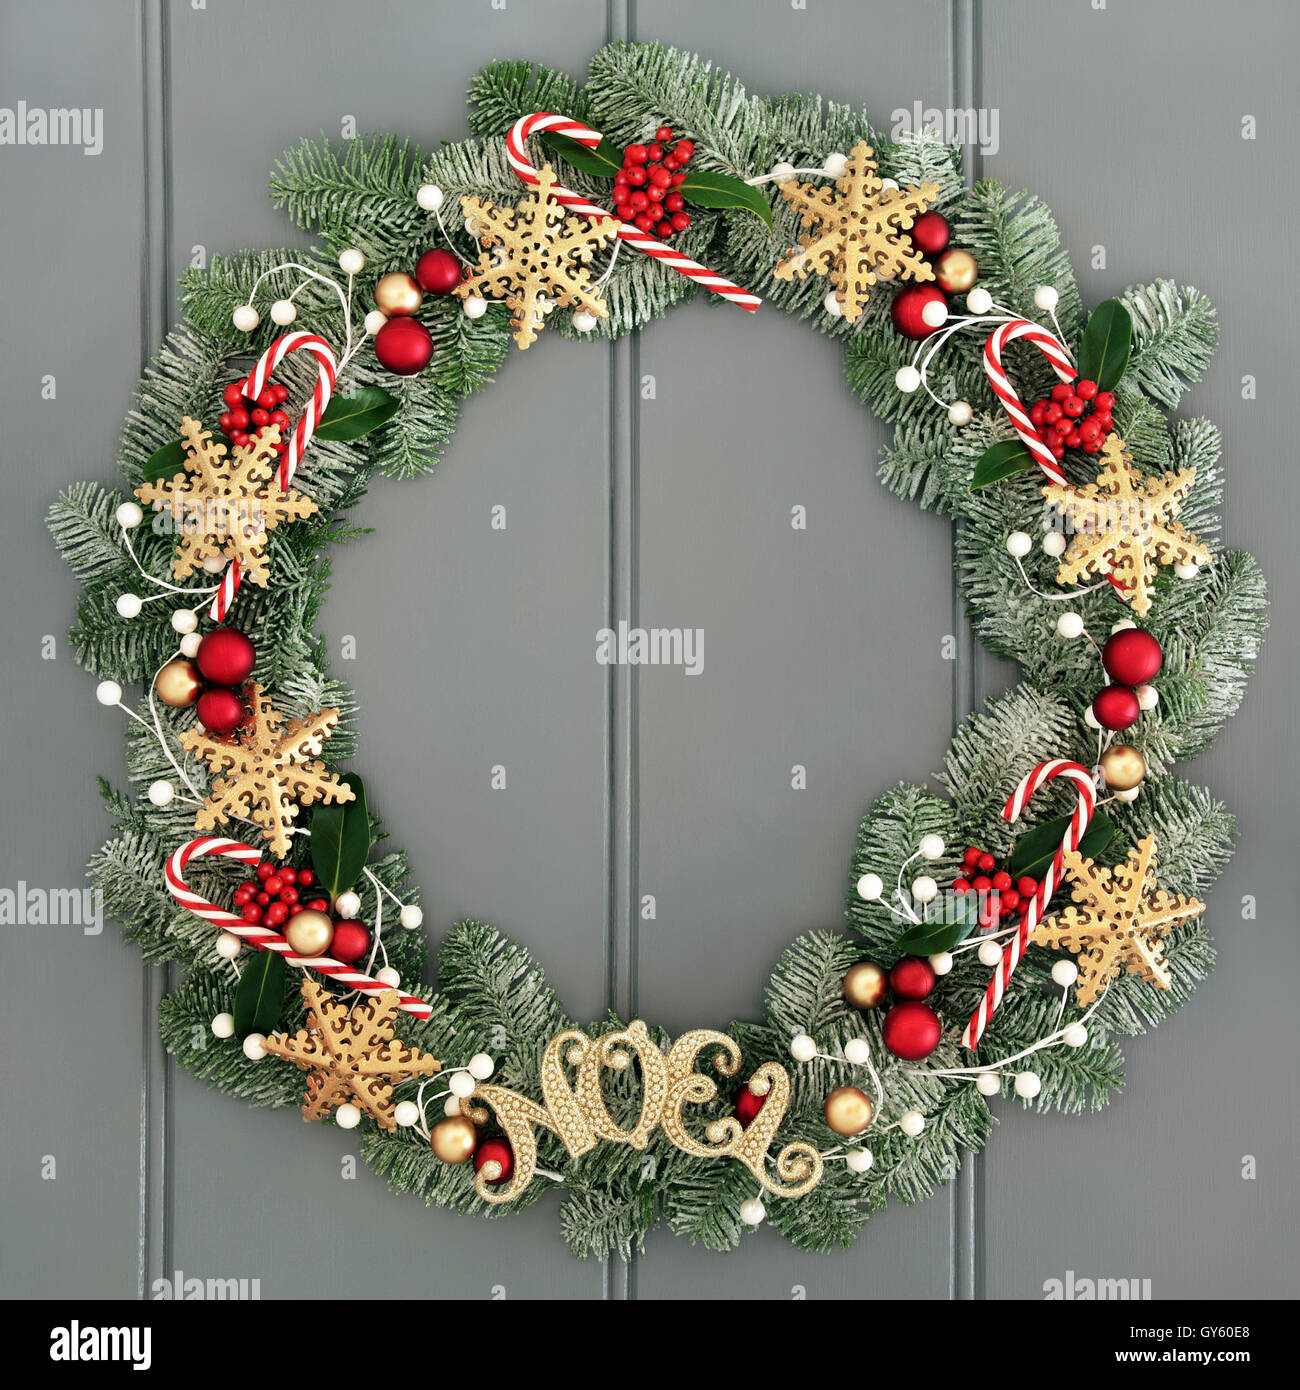 Christmas wreath with noel sign and snowflake decorations, candy canes, red and gold baubles, holly and snow covered fir. Stock Photo